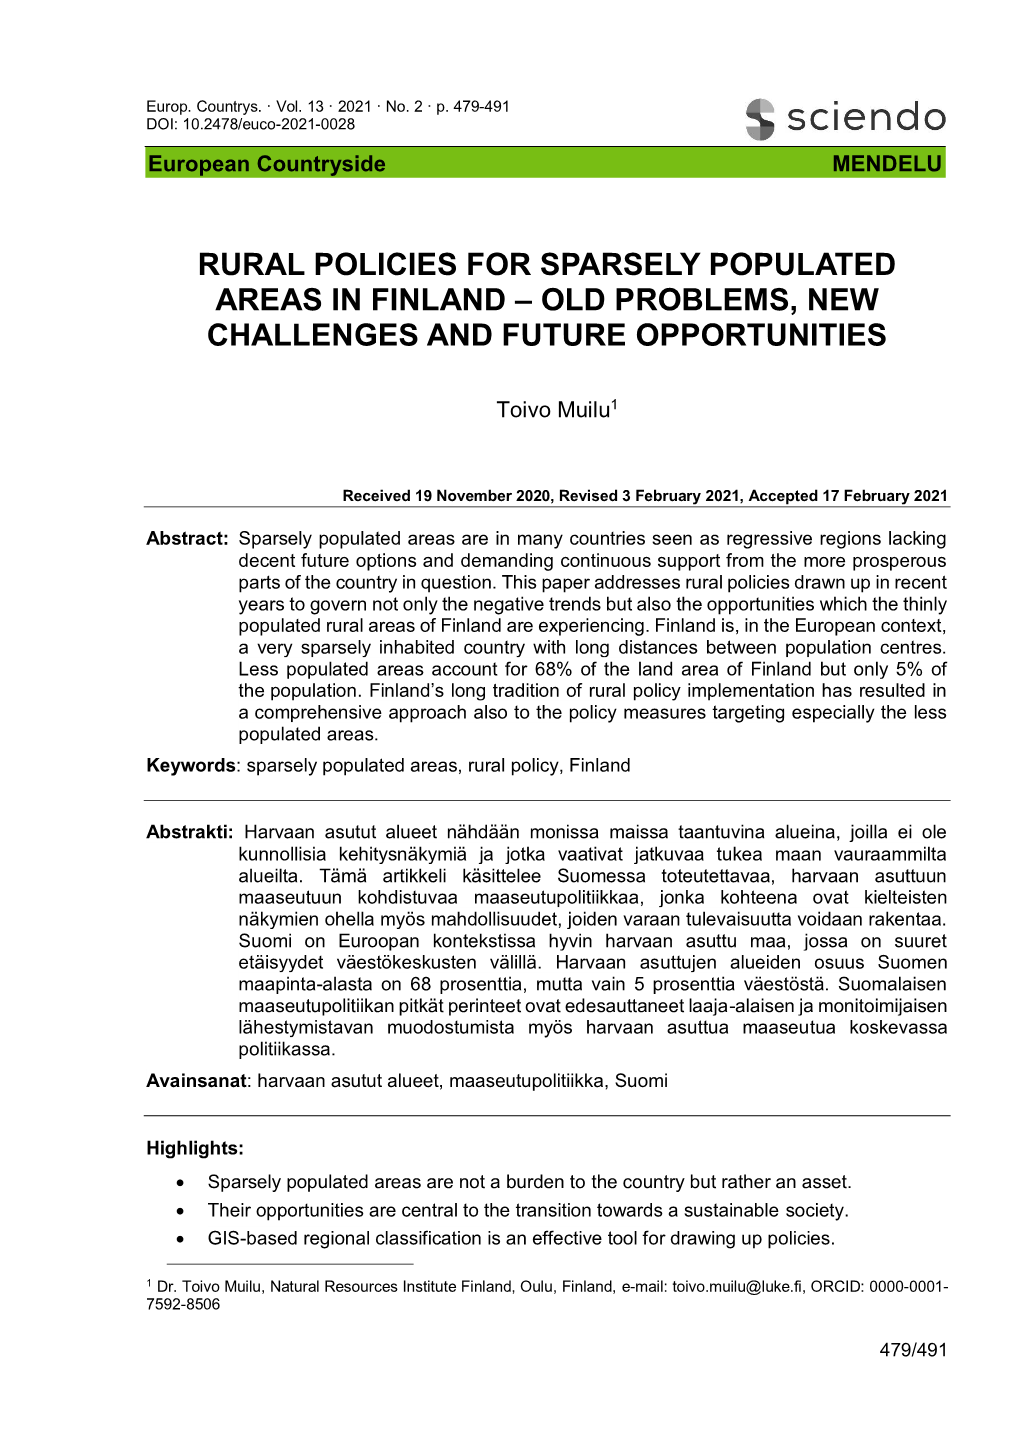 Rural Policies for Sparsely Populated Areas in Finland – Old Problems, New Challenges and Future Opportunities